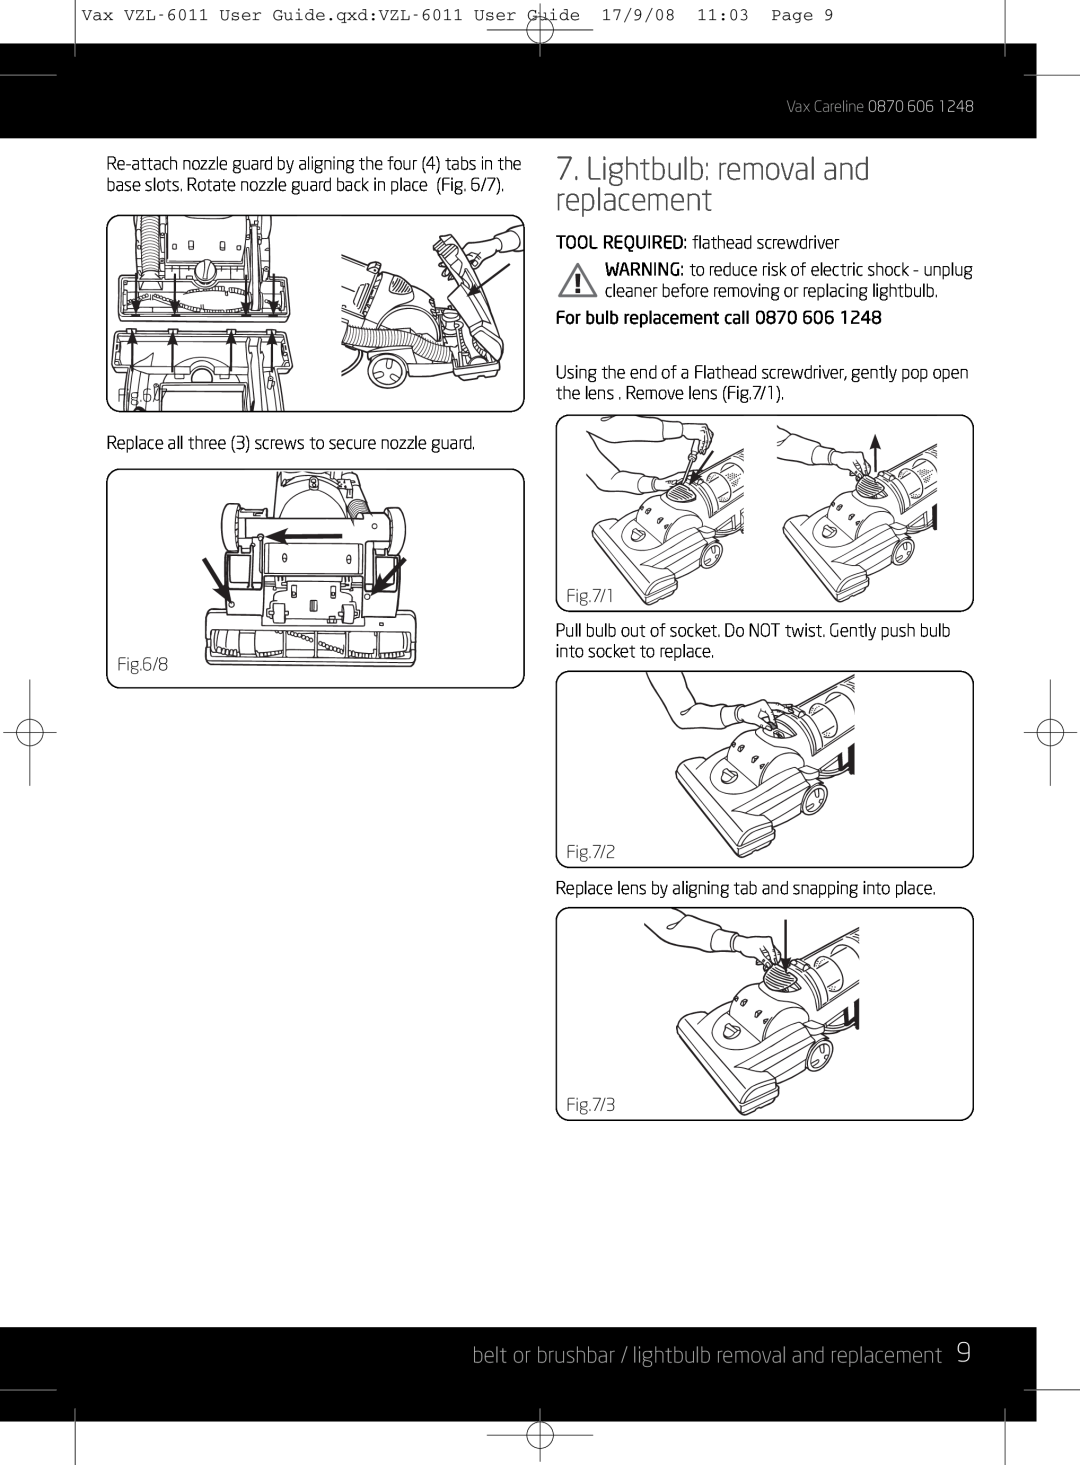 Vizio VZL-6011 instruction manual Lightbulb removal and replacement 